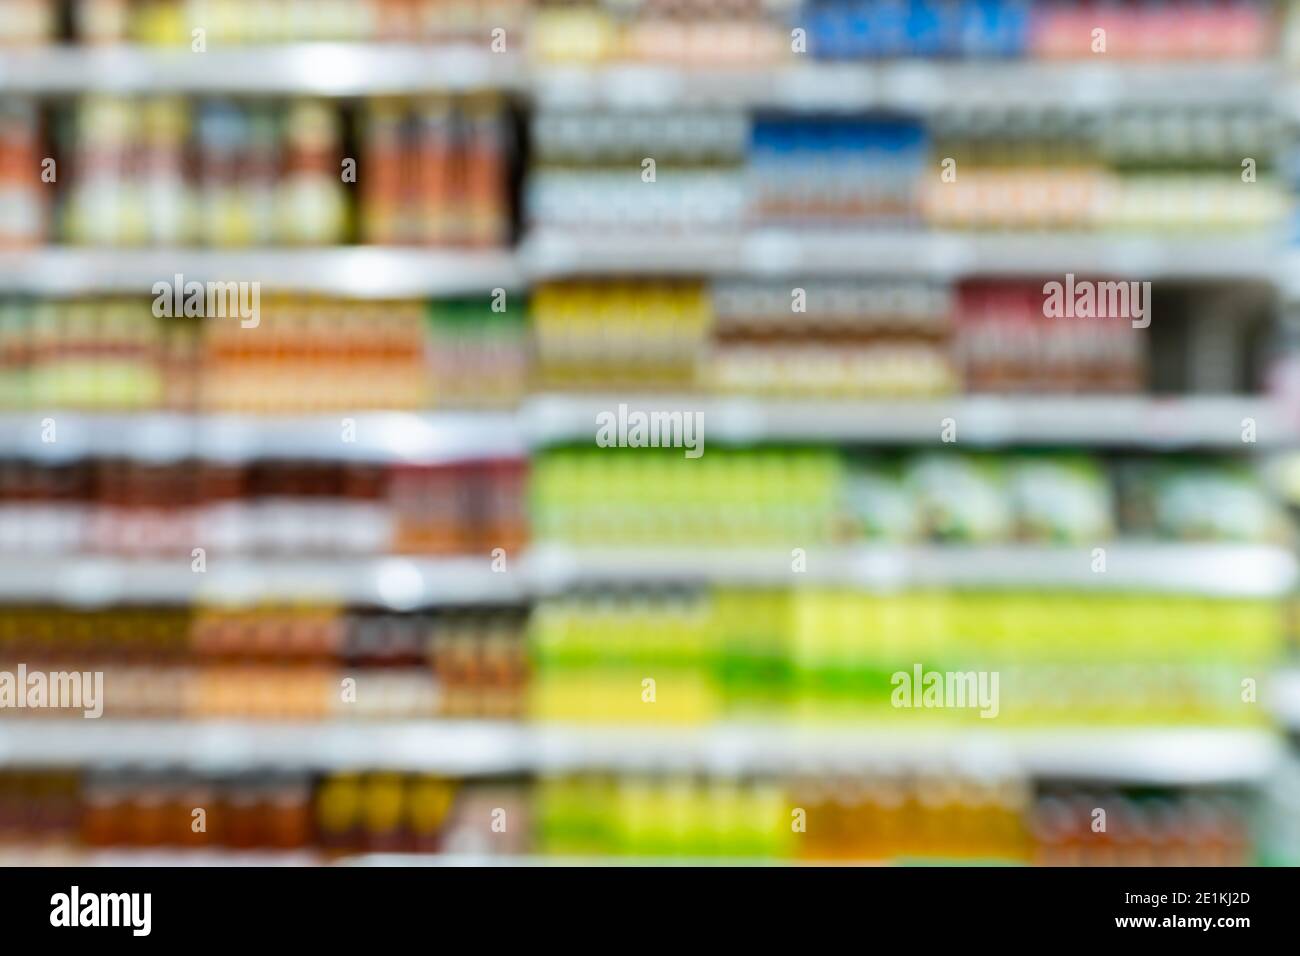 Blur image of shelf with consumer product shop in supermarket Stock Photo